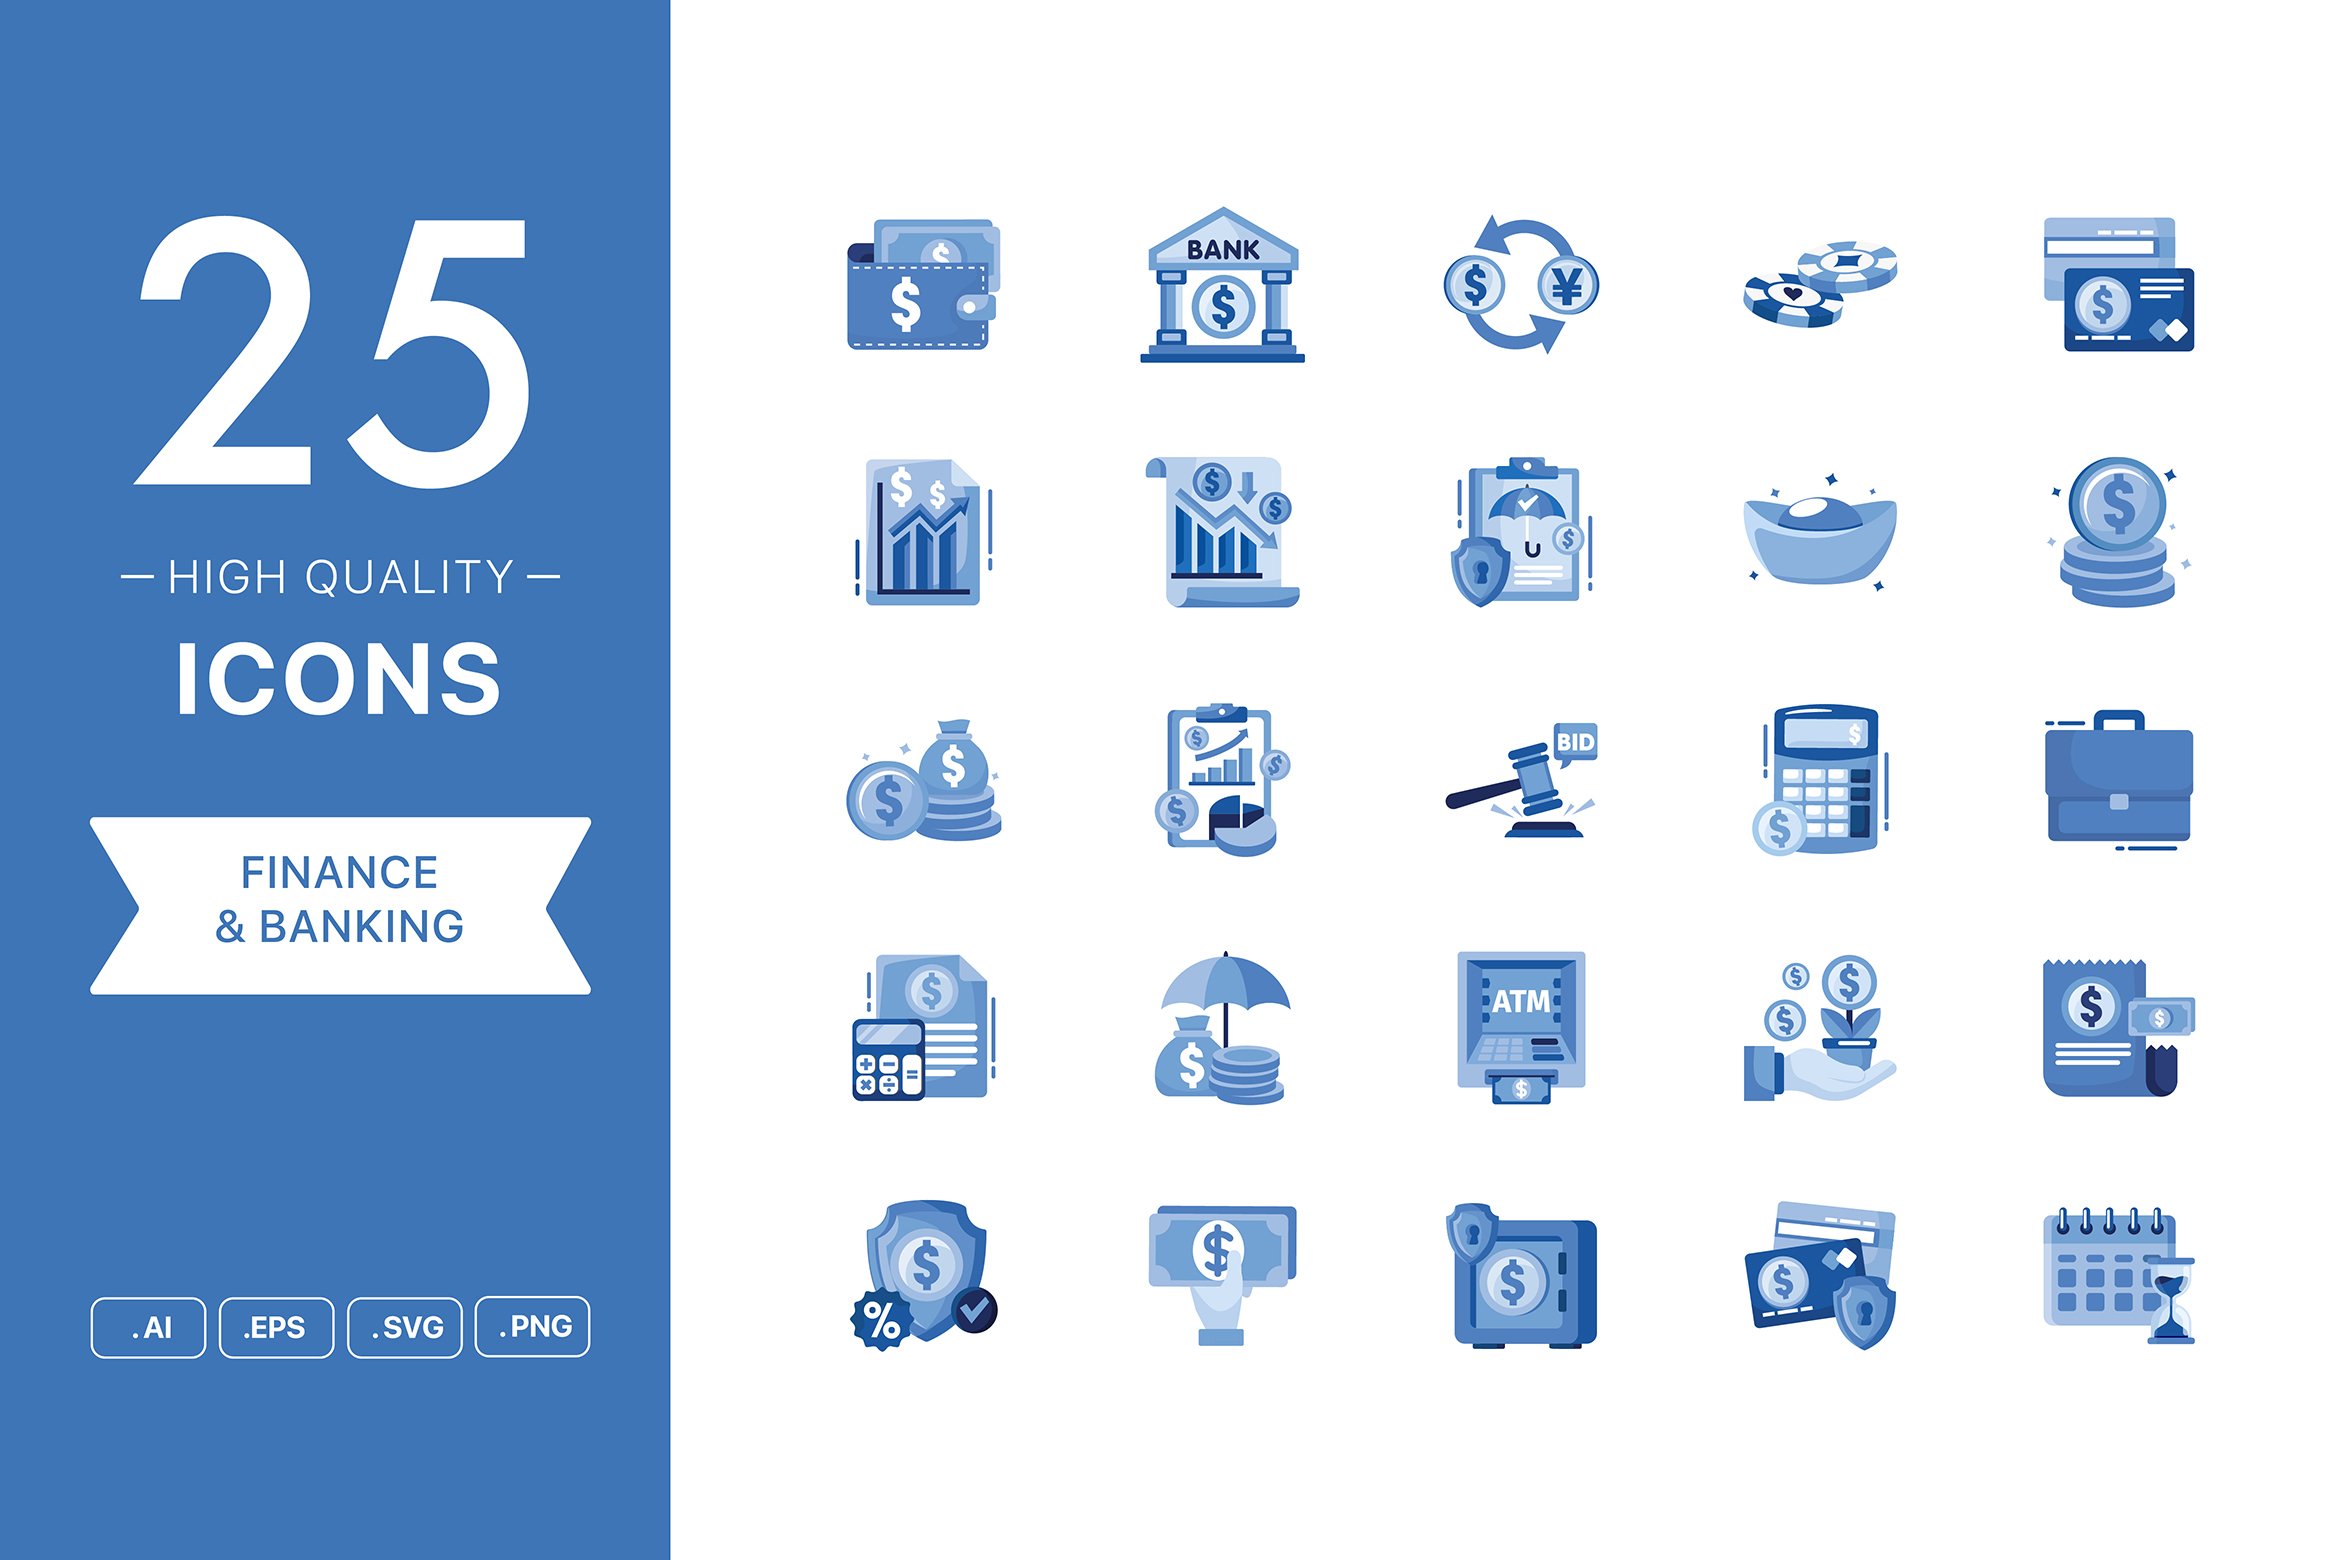 Finance Icon Set cover image.